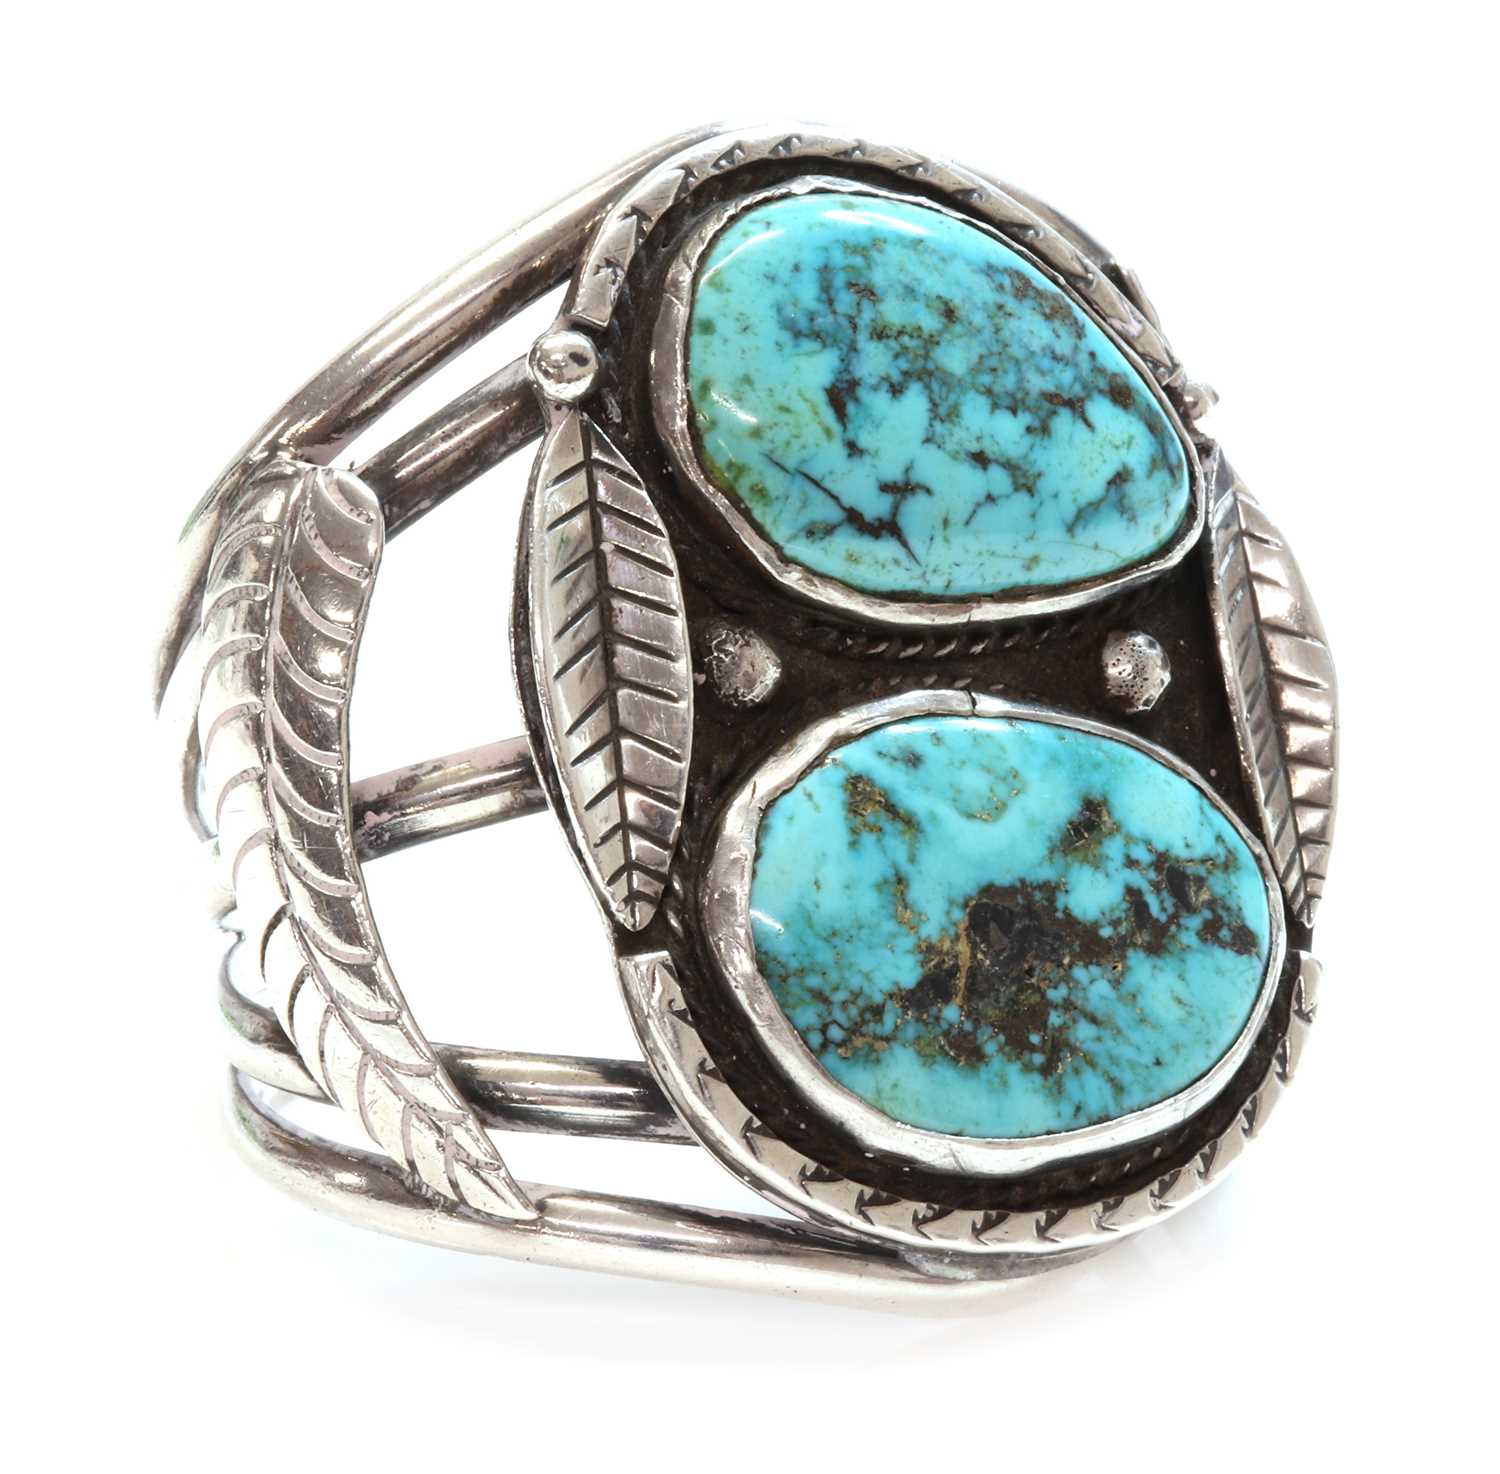 Lot 278 - A silver Navajo turquoise set torque bangle or cuff